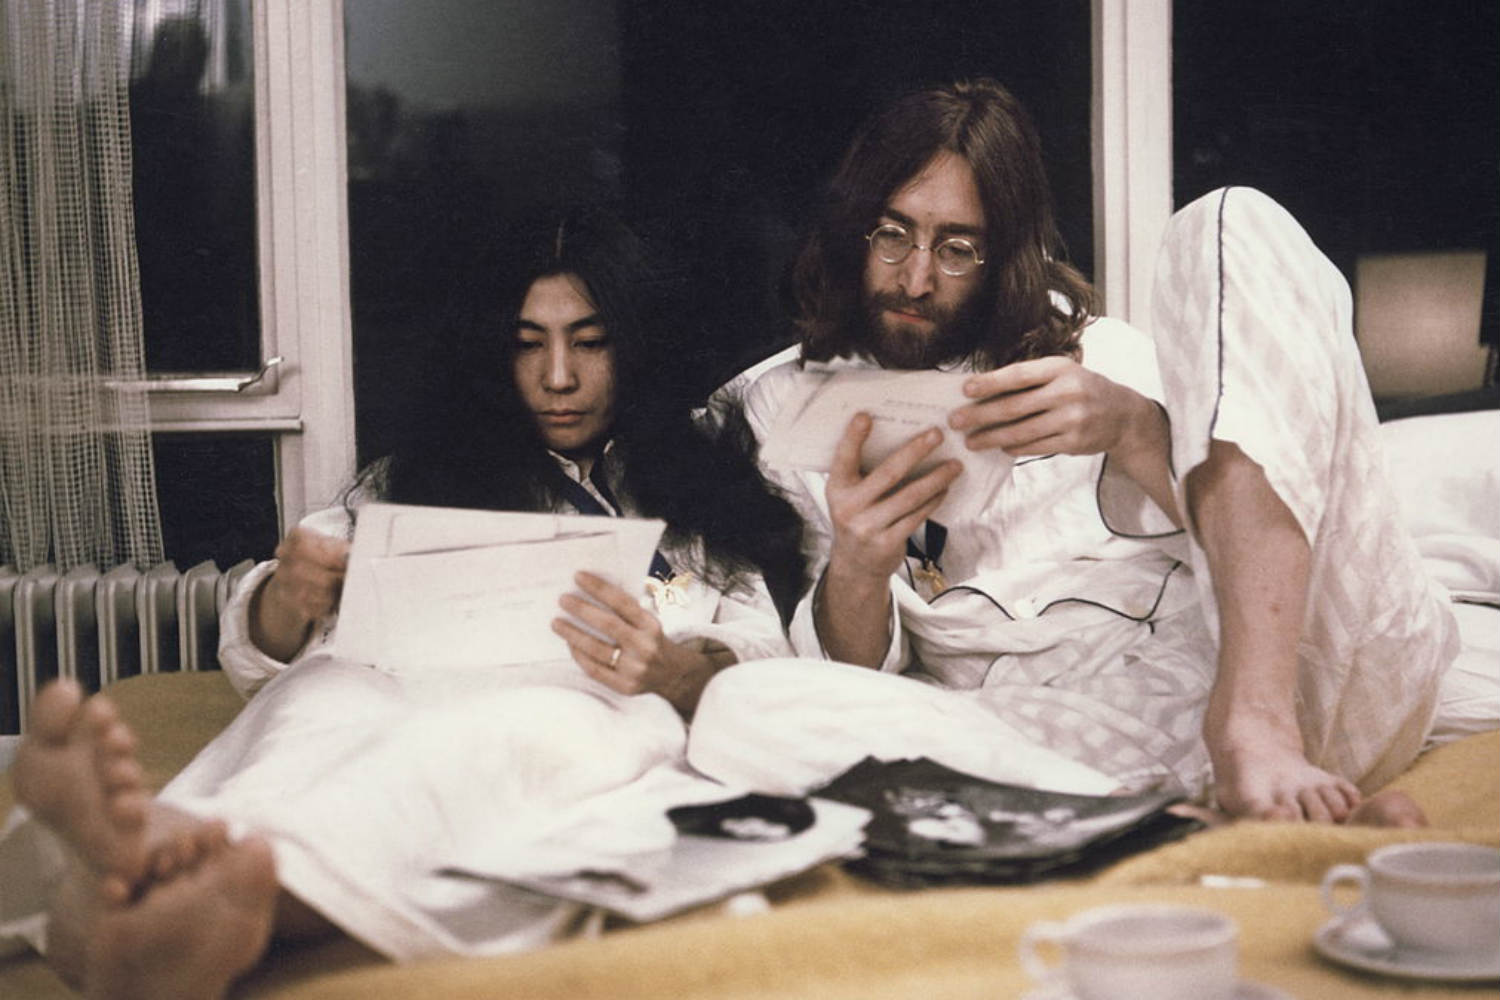 John Lennon and Yoko Onos Love Story Of Five Decades Sound of Life Powered by